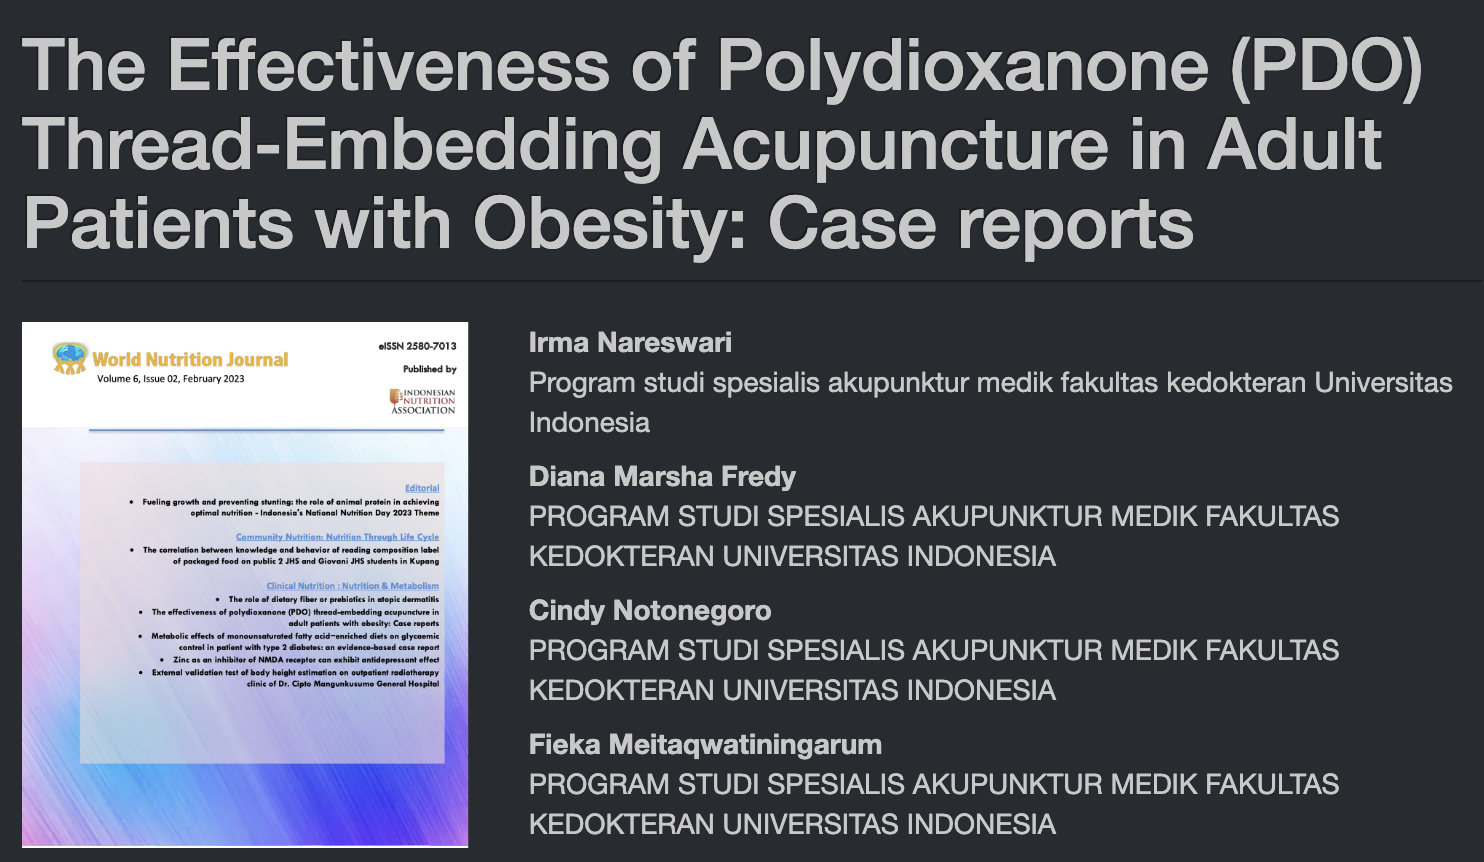 The Effectiveness of Polydioxanone (PDO) Thread-Embedding Acupuncture in Adult Patients with Obesity: Case reports - Perhimpunan Dokter Spesialis Akupunktur Medik Indonesia